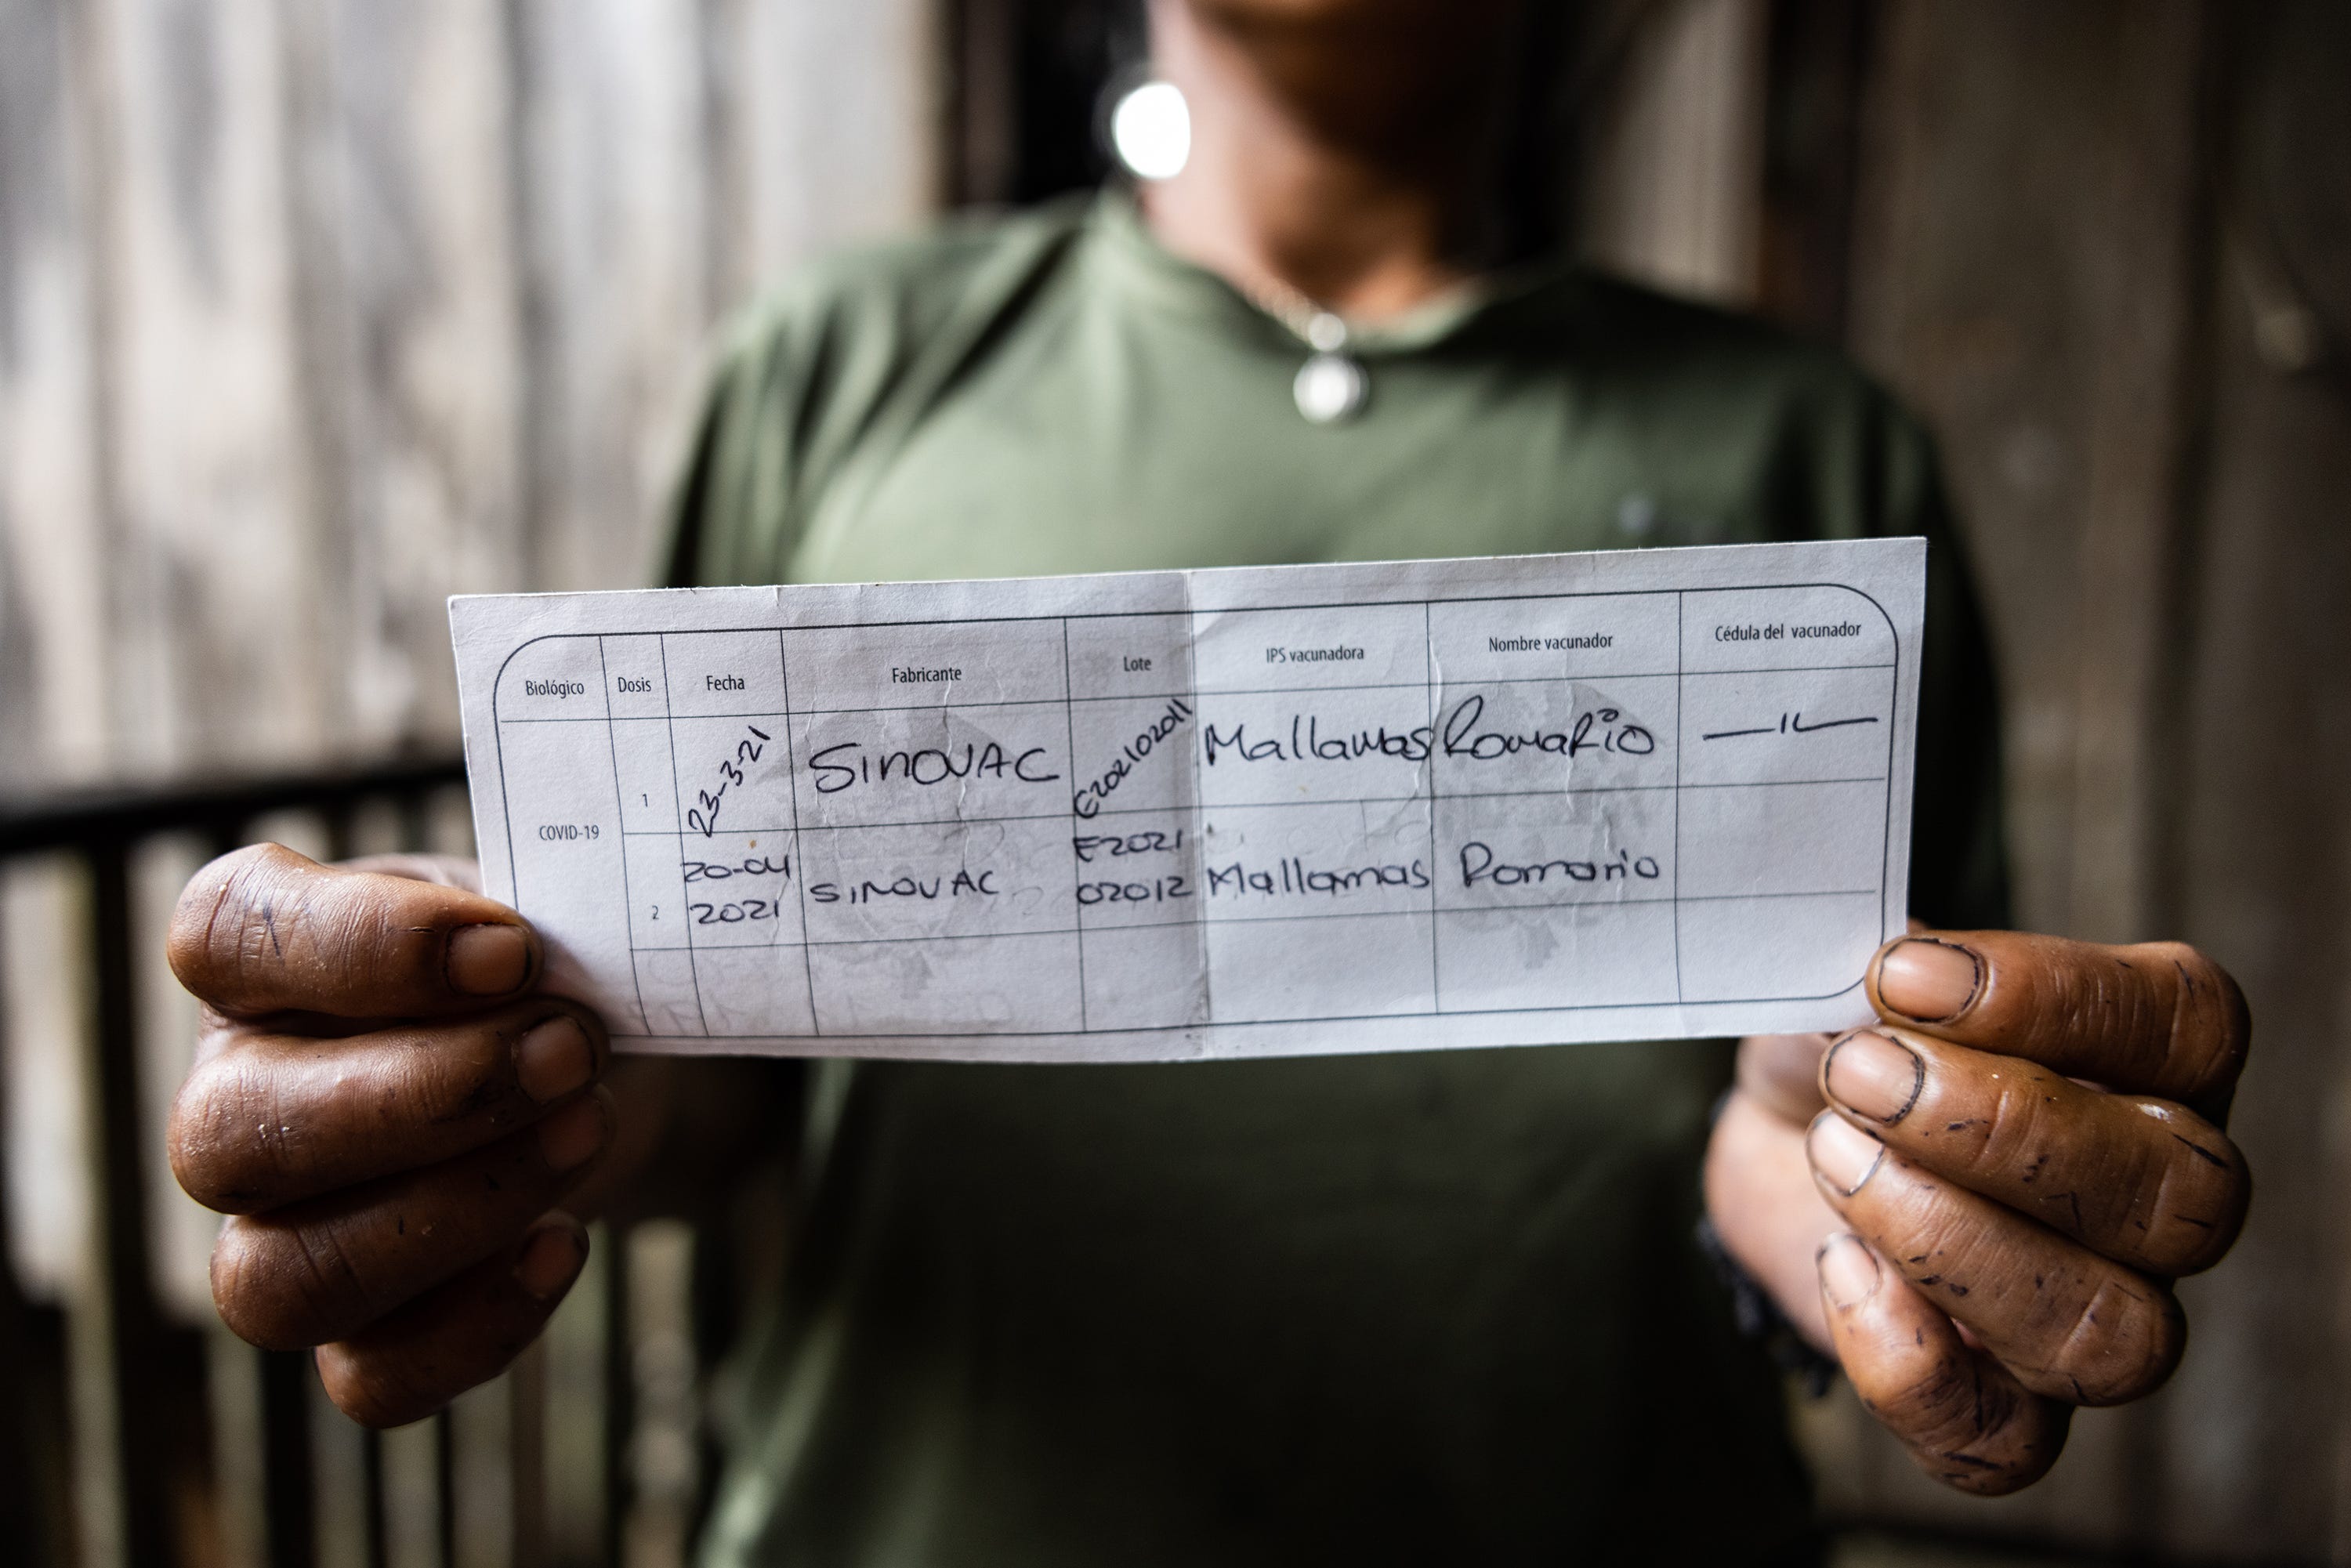 Nallive Parente, 42, shows her vaccination card with the two doses she has received. The Ticuna nurse Romario Mujica gave her the shots.